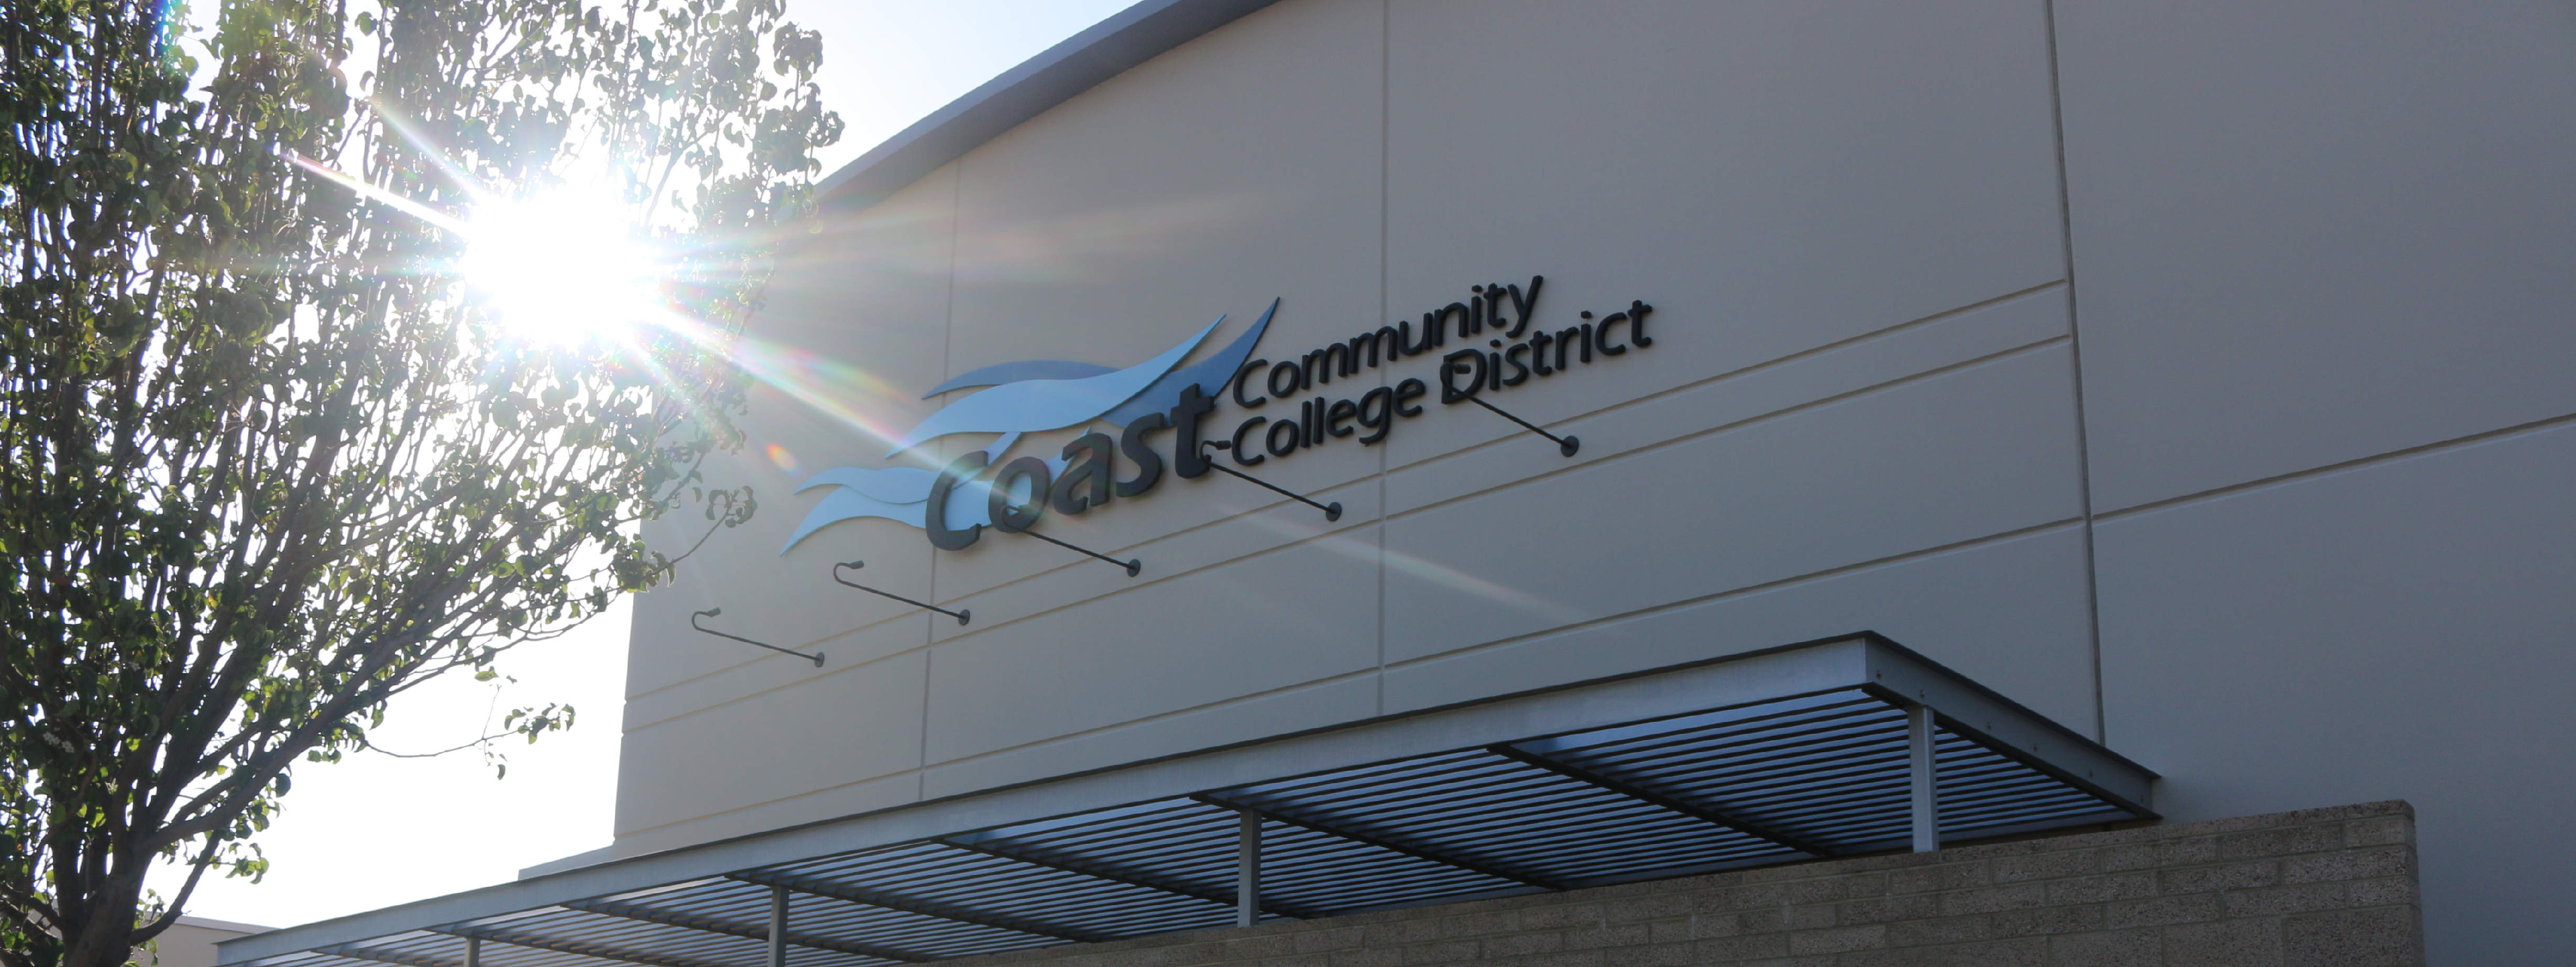 Coast Community College District building with logo